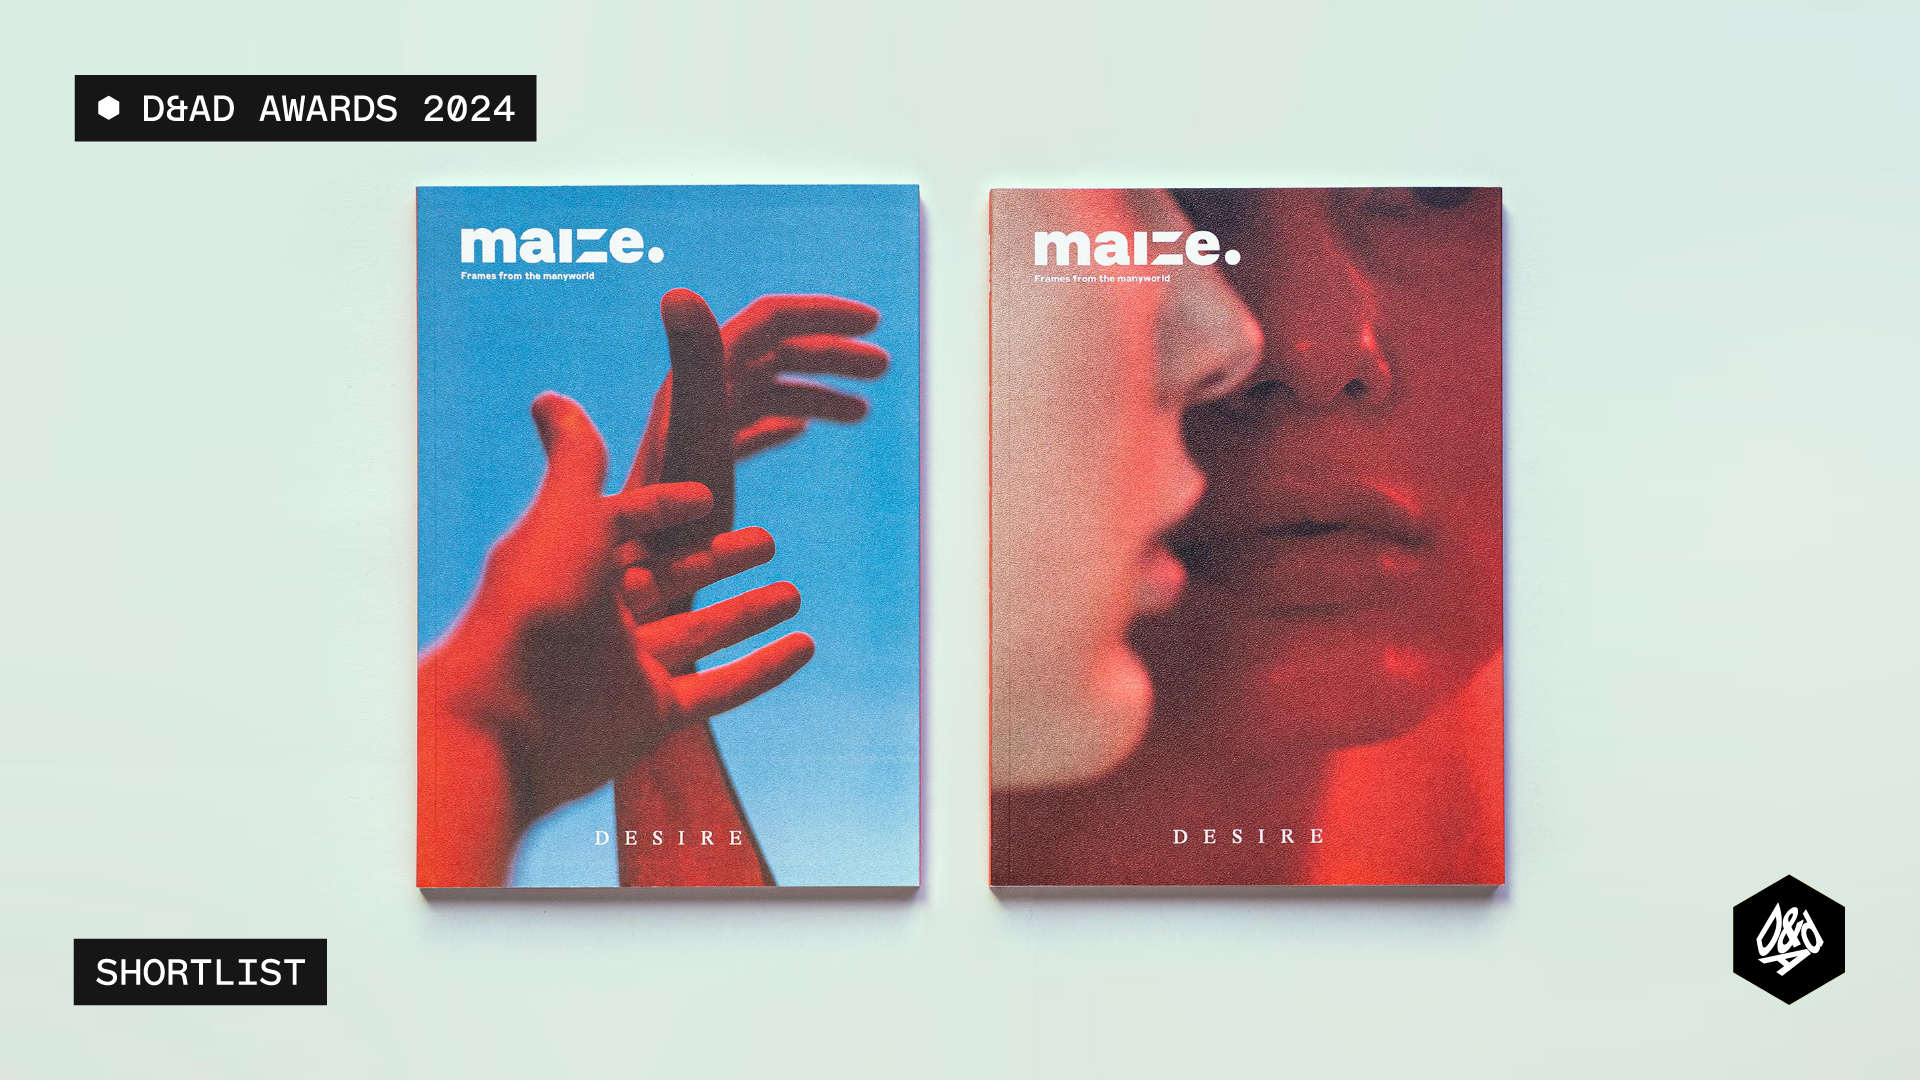 MAIZE magazine is shortlisted for the D&AD Awards 2024